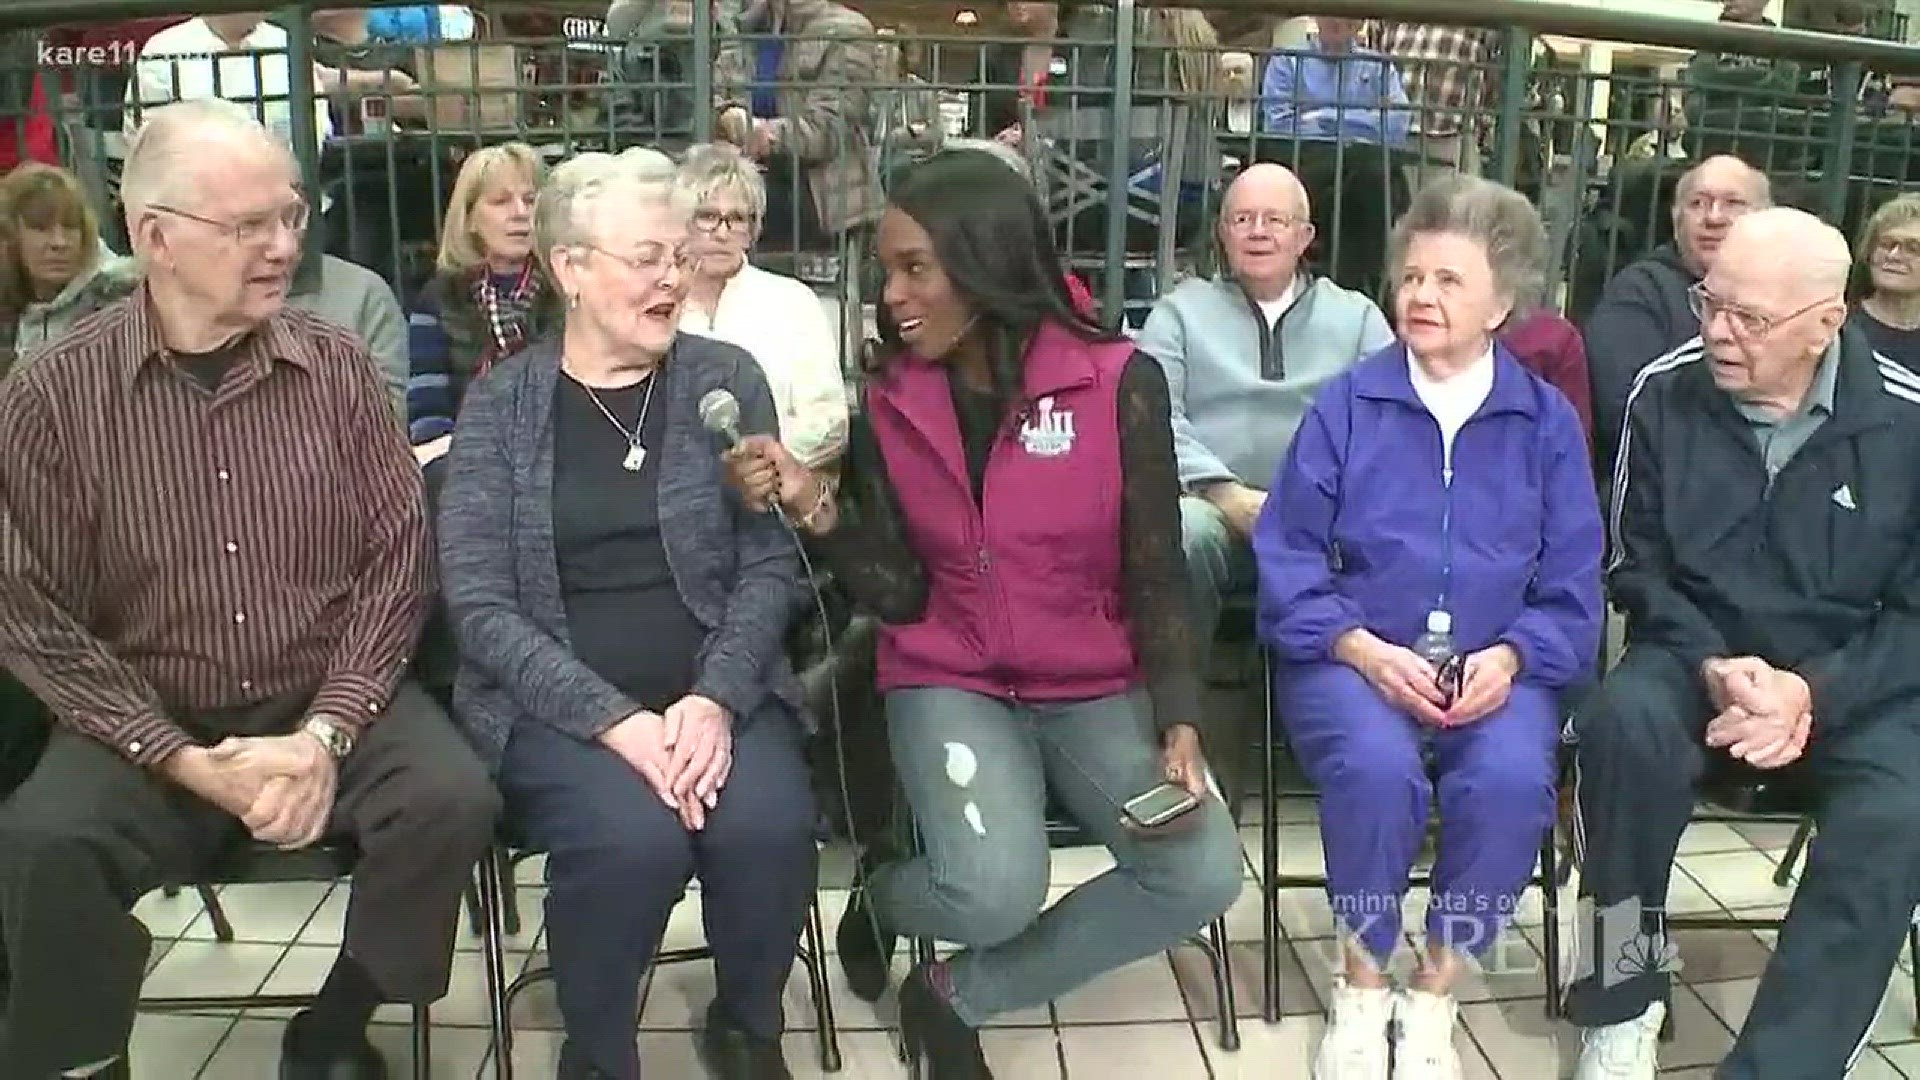 Seasoned Mall of America mall walkers share why they use the mall in their workout routines.